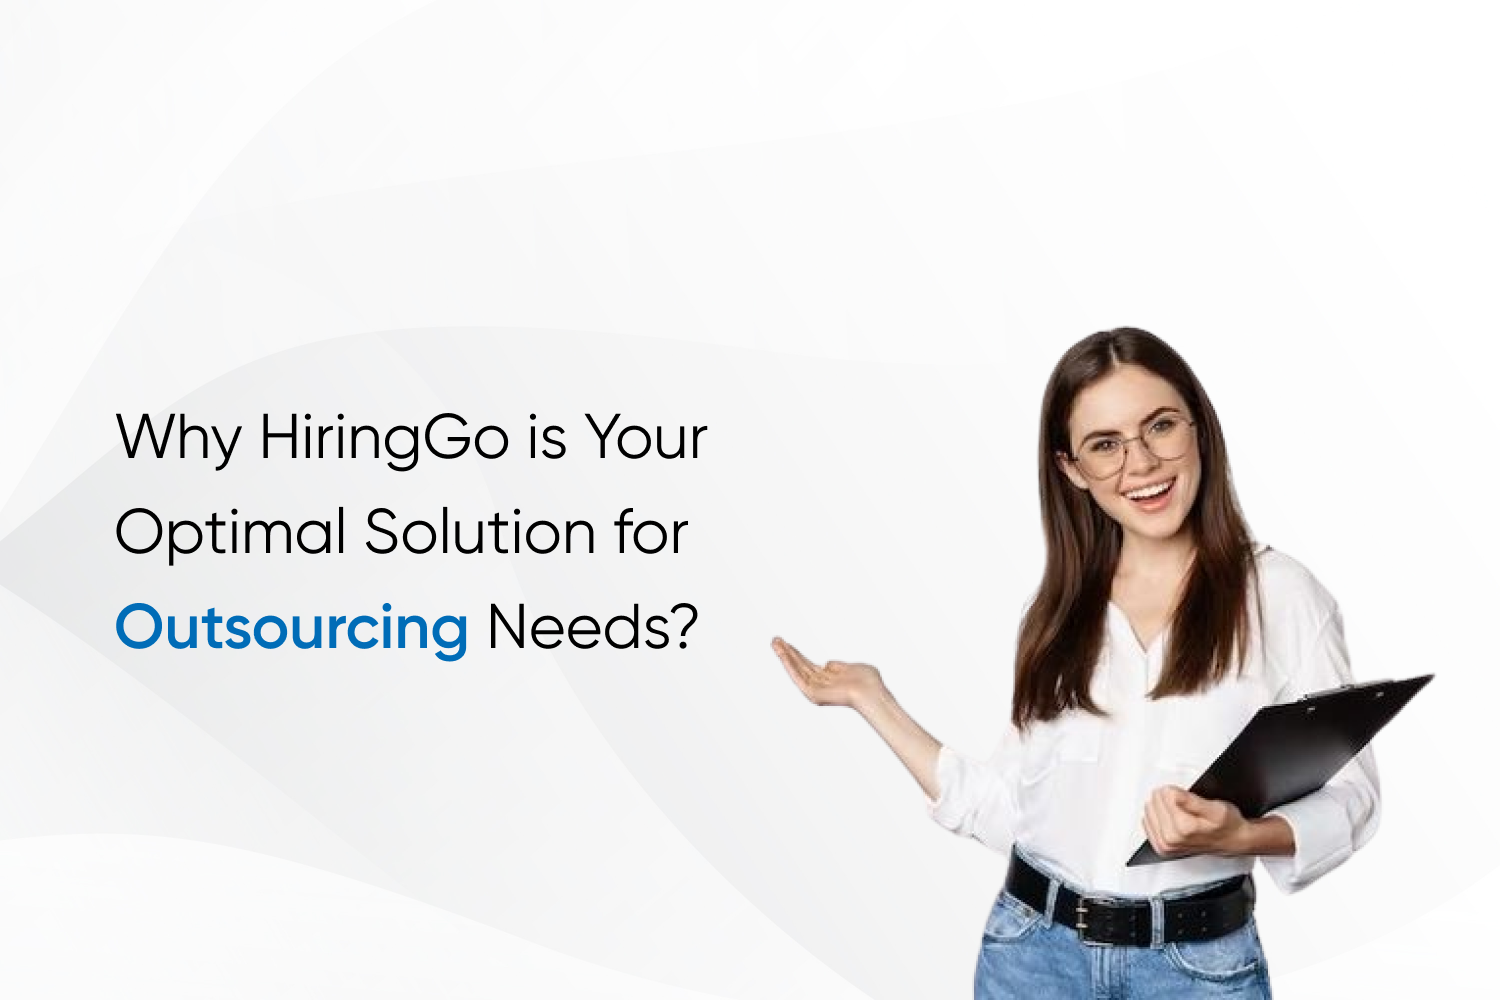 Why HiringGo is Your Optimal Solution for Outsourcing Needs